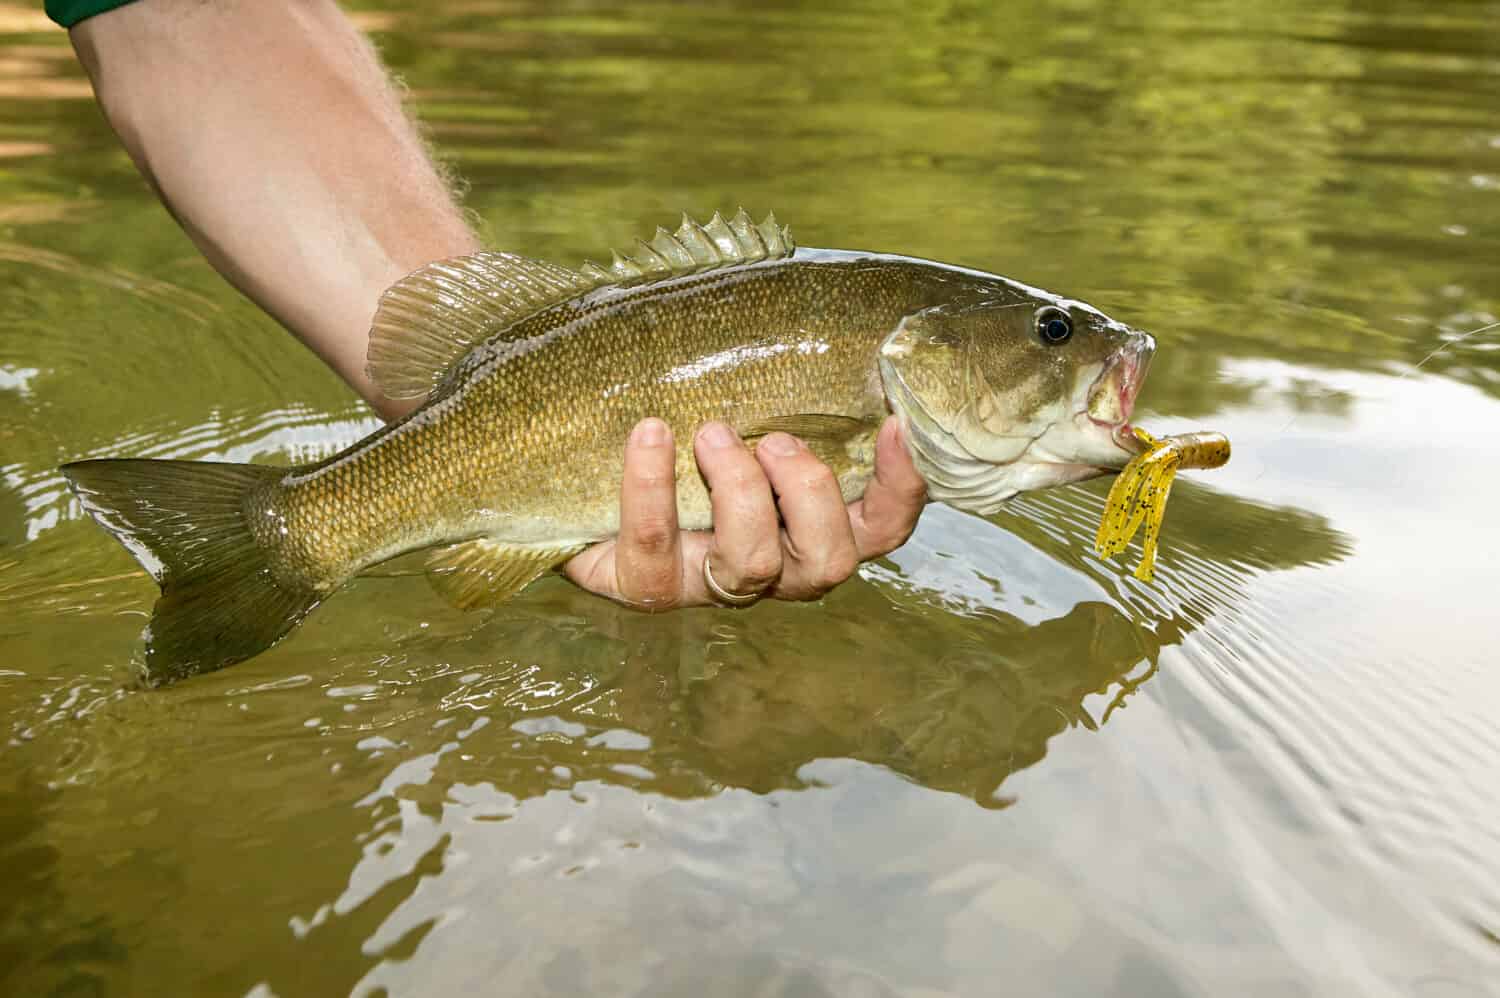 Close up on a freshly caught smallmouth bass ith a flure and hook in its mouth in the hand of a fisherman displaying it over the water in the river